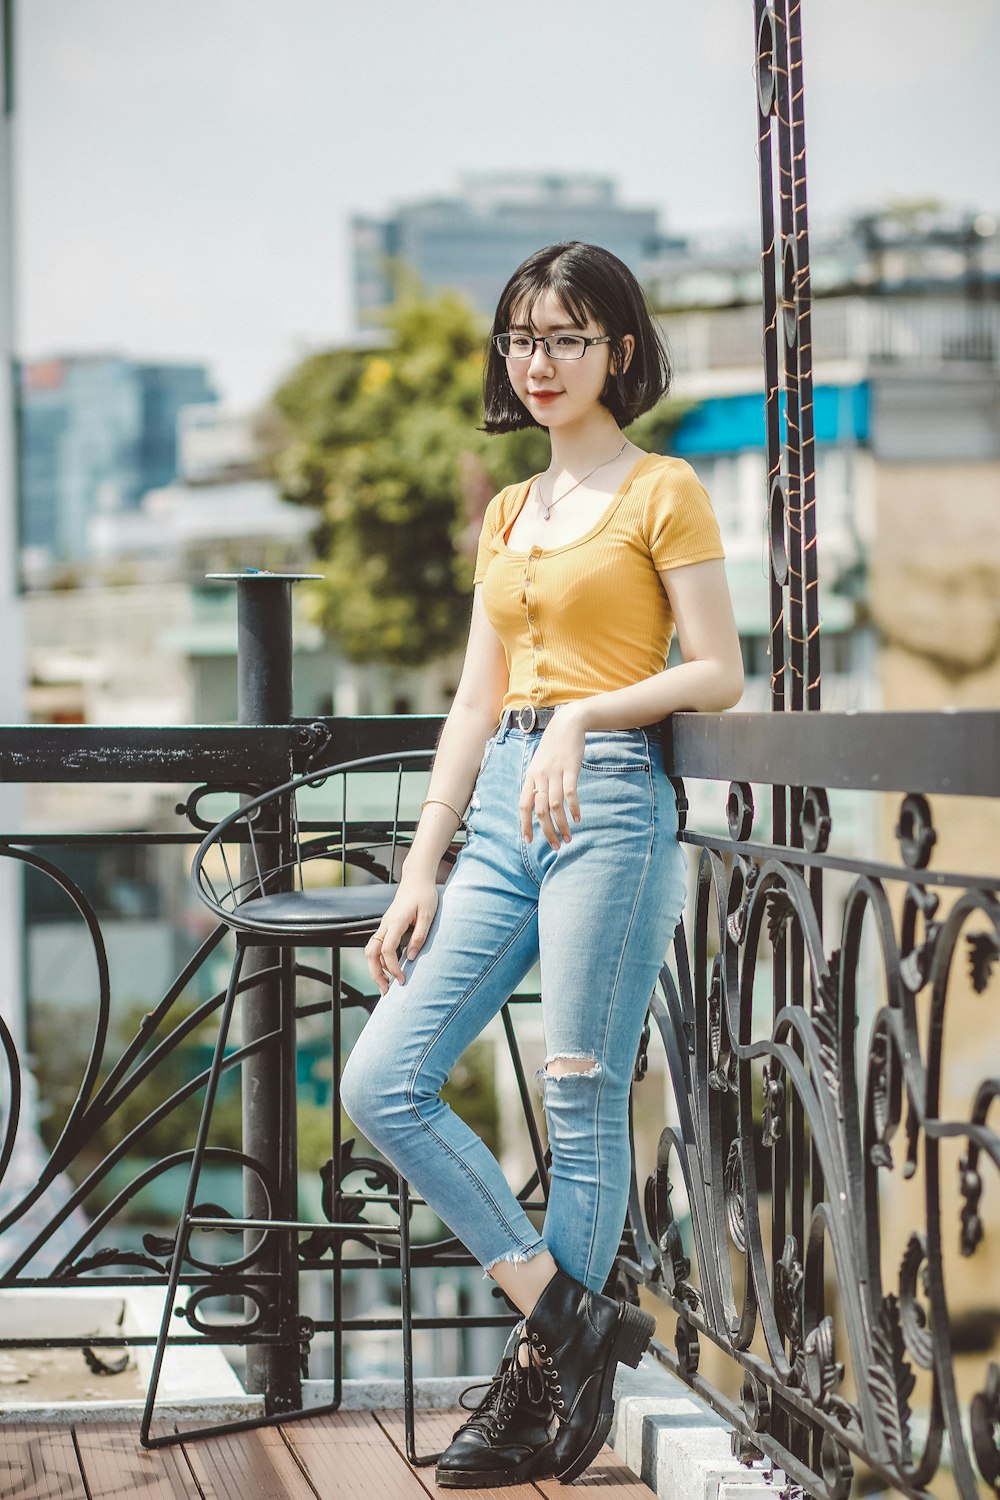 woman in yellow shirt and blue denim jeans sitting on black metal railings